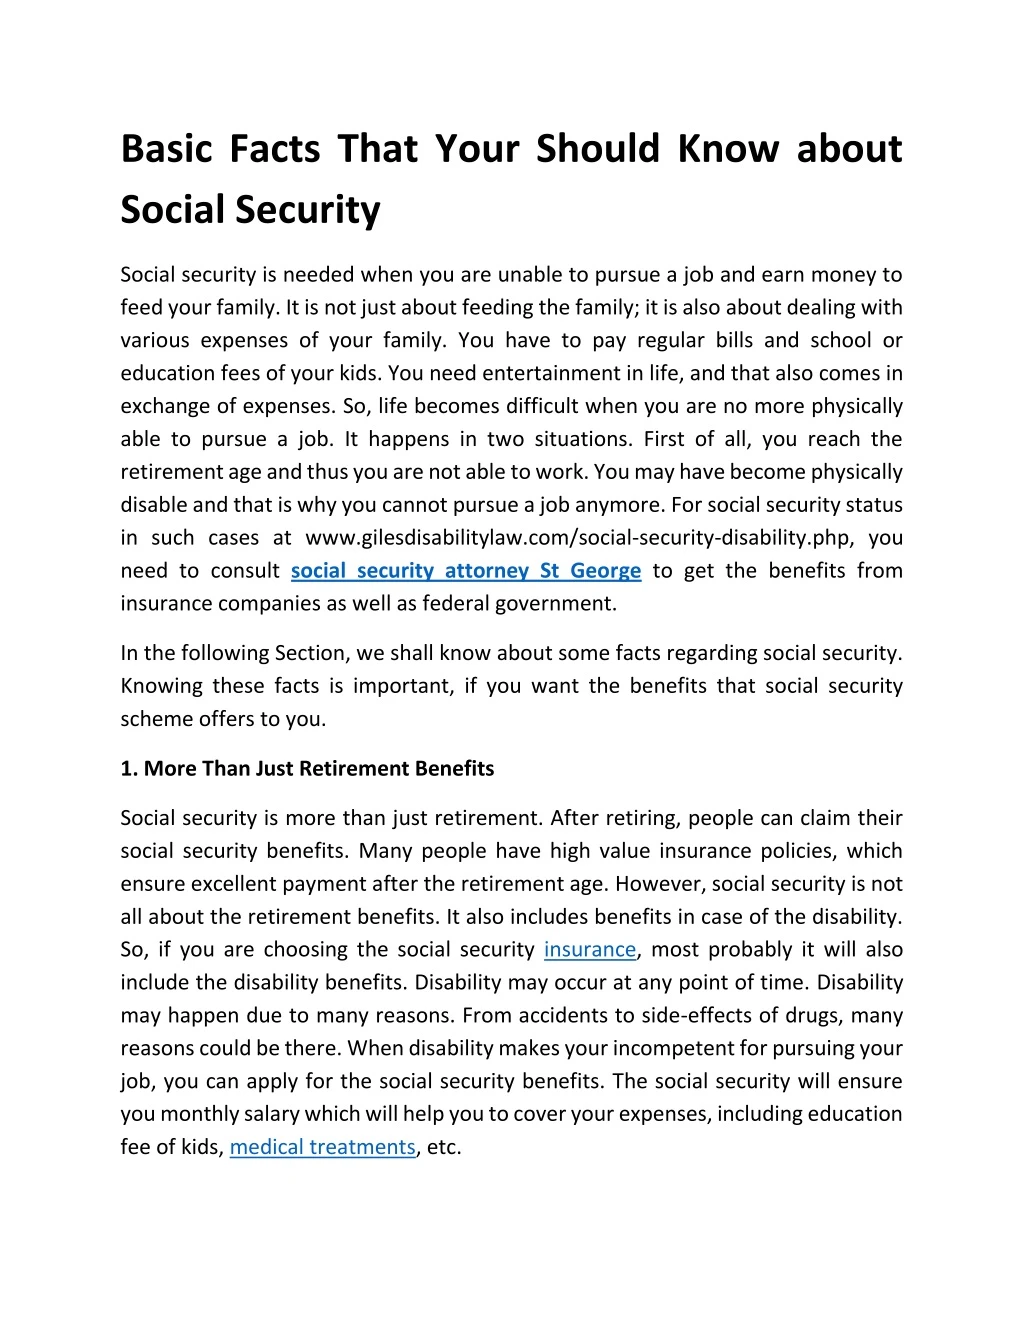 basic facts that your should know about social